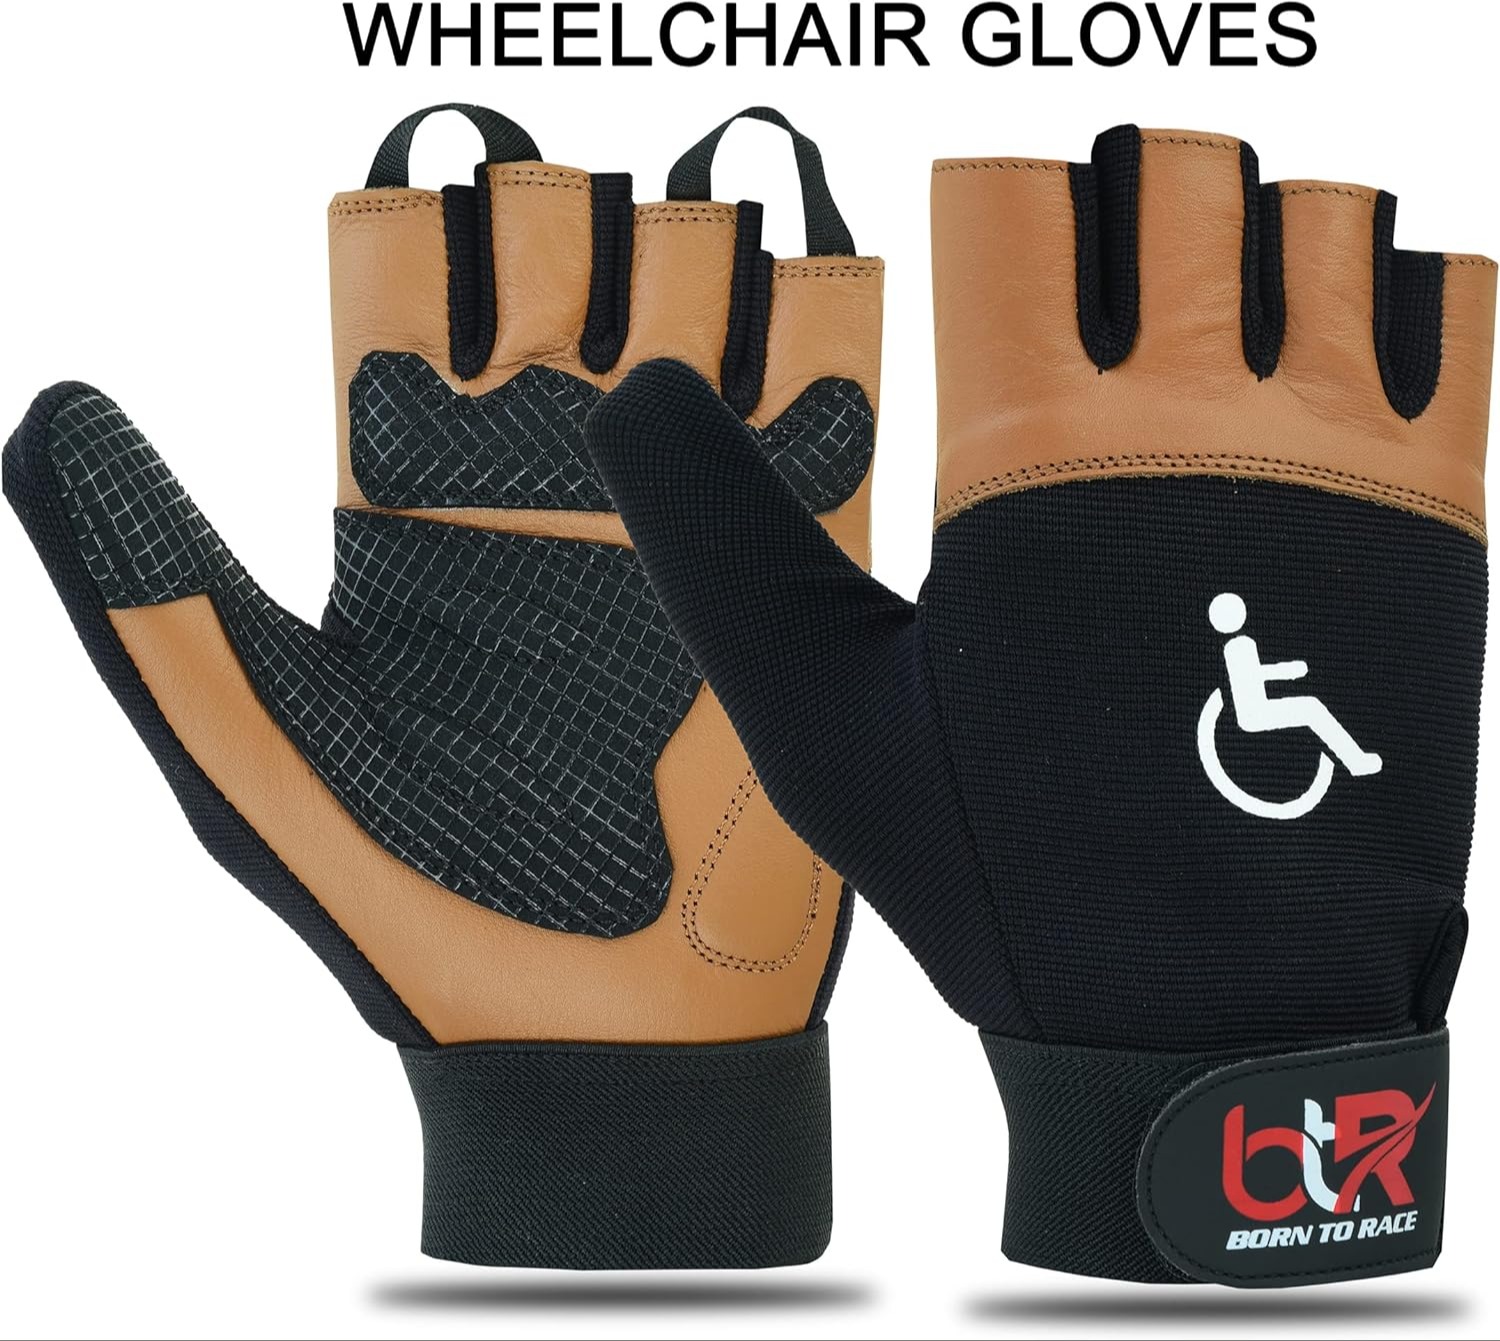 BTR BORN TO RACE Wheelchair Gloves for Men and Women | Workout Gloves | Fingerless Long Thumb Leather Palm 31